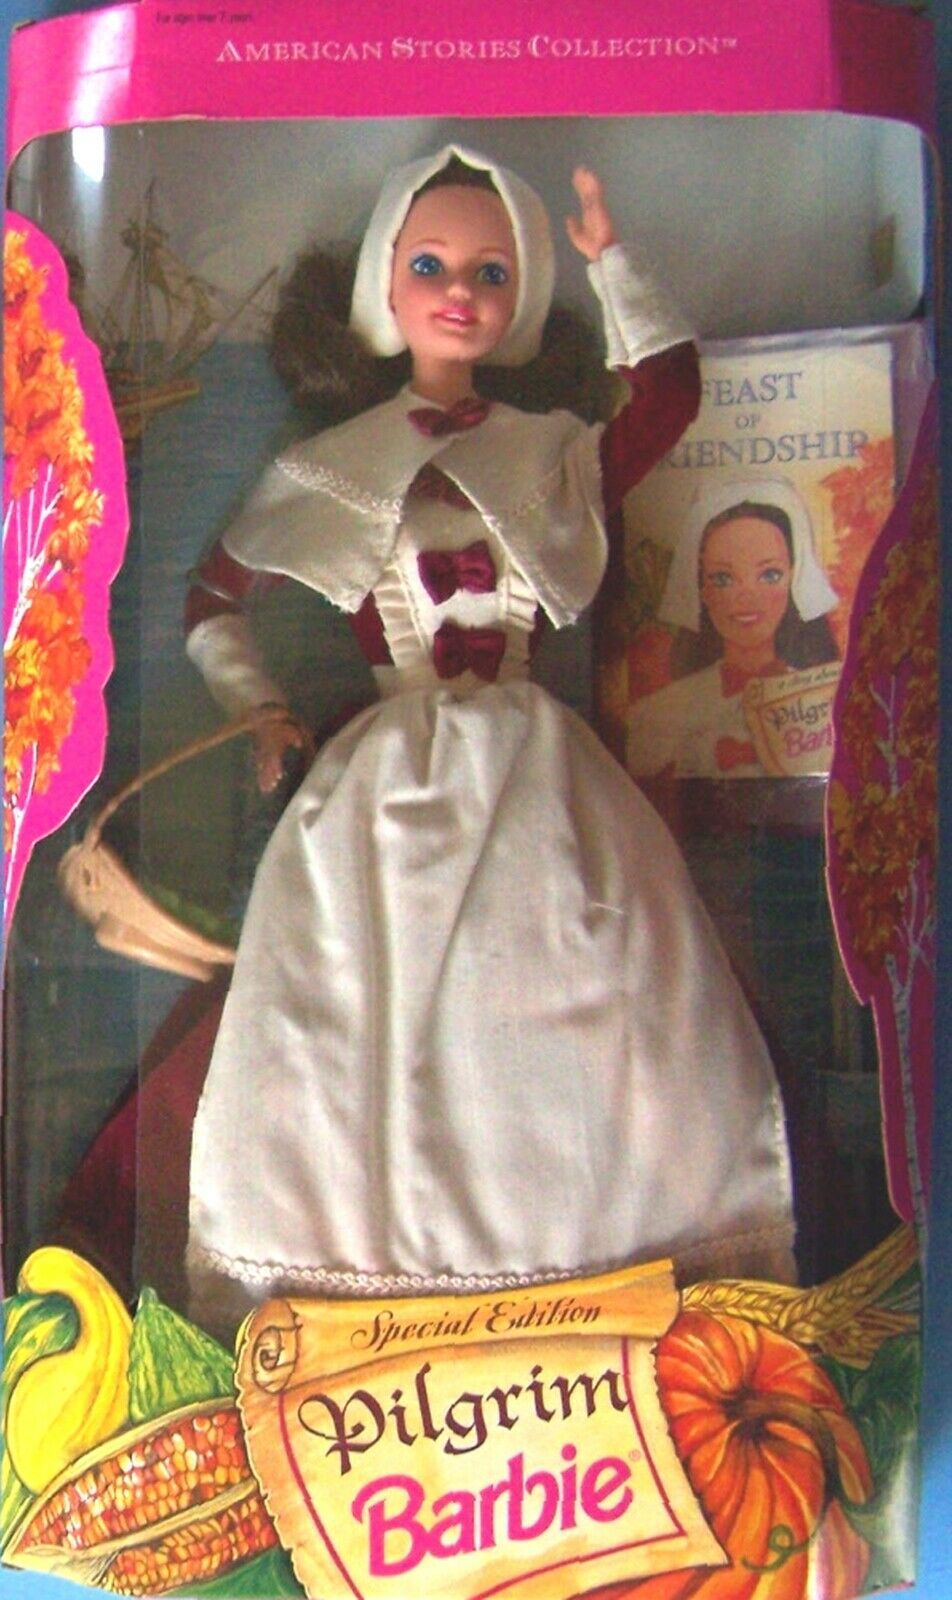 Primary image for Pilgrim Barbie Doll American Stories Collection Special Edition 1994 Mattel NRFB